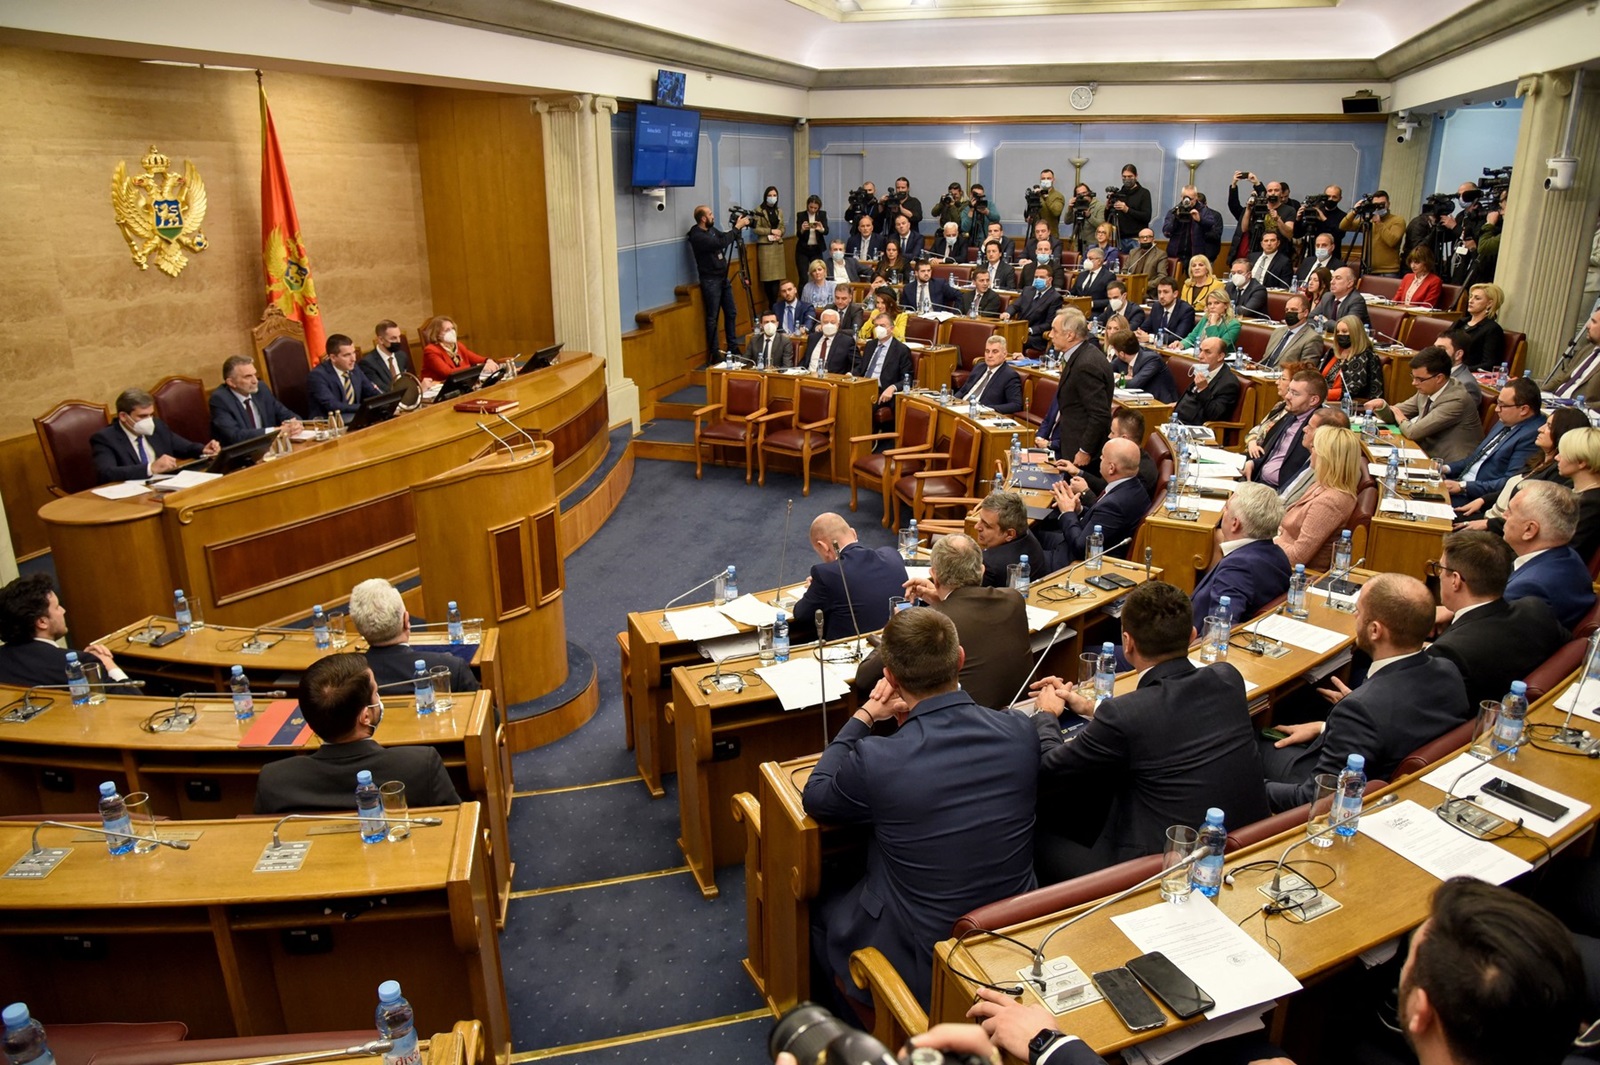 Montenegro MPs attend a parliament session in Podgorica on February 4, 2022, as the government faces no-confidence vote as ruling coalition splits. Montenegro's government was set to be dissolved following a no-confidence vote late February 4, 2022 that sent the country's prime minister packing. The vote follows months of building tensions in the Balkan nation where a dysfunctional coalition government elected in 2020 has failed to make any tangible progress in passing reforms since taking power.,Image: 659306820, License: Rights-managed, Restrictions: , Model Release: no, Credit line: SAVO PRELEVIC / AFP / Profimedia